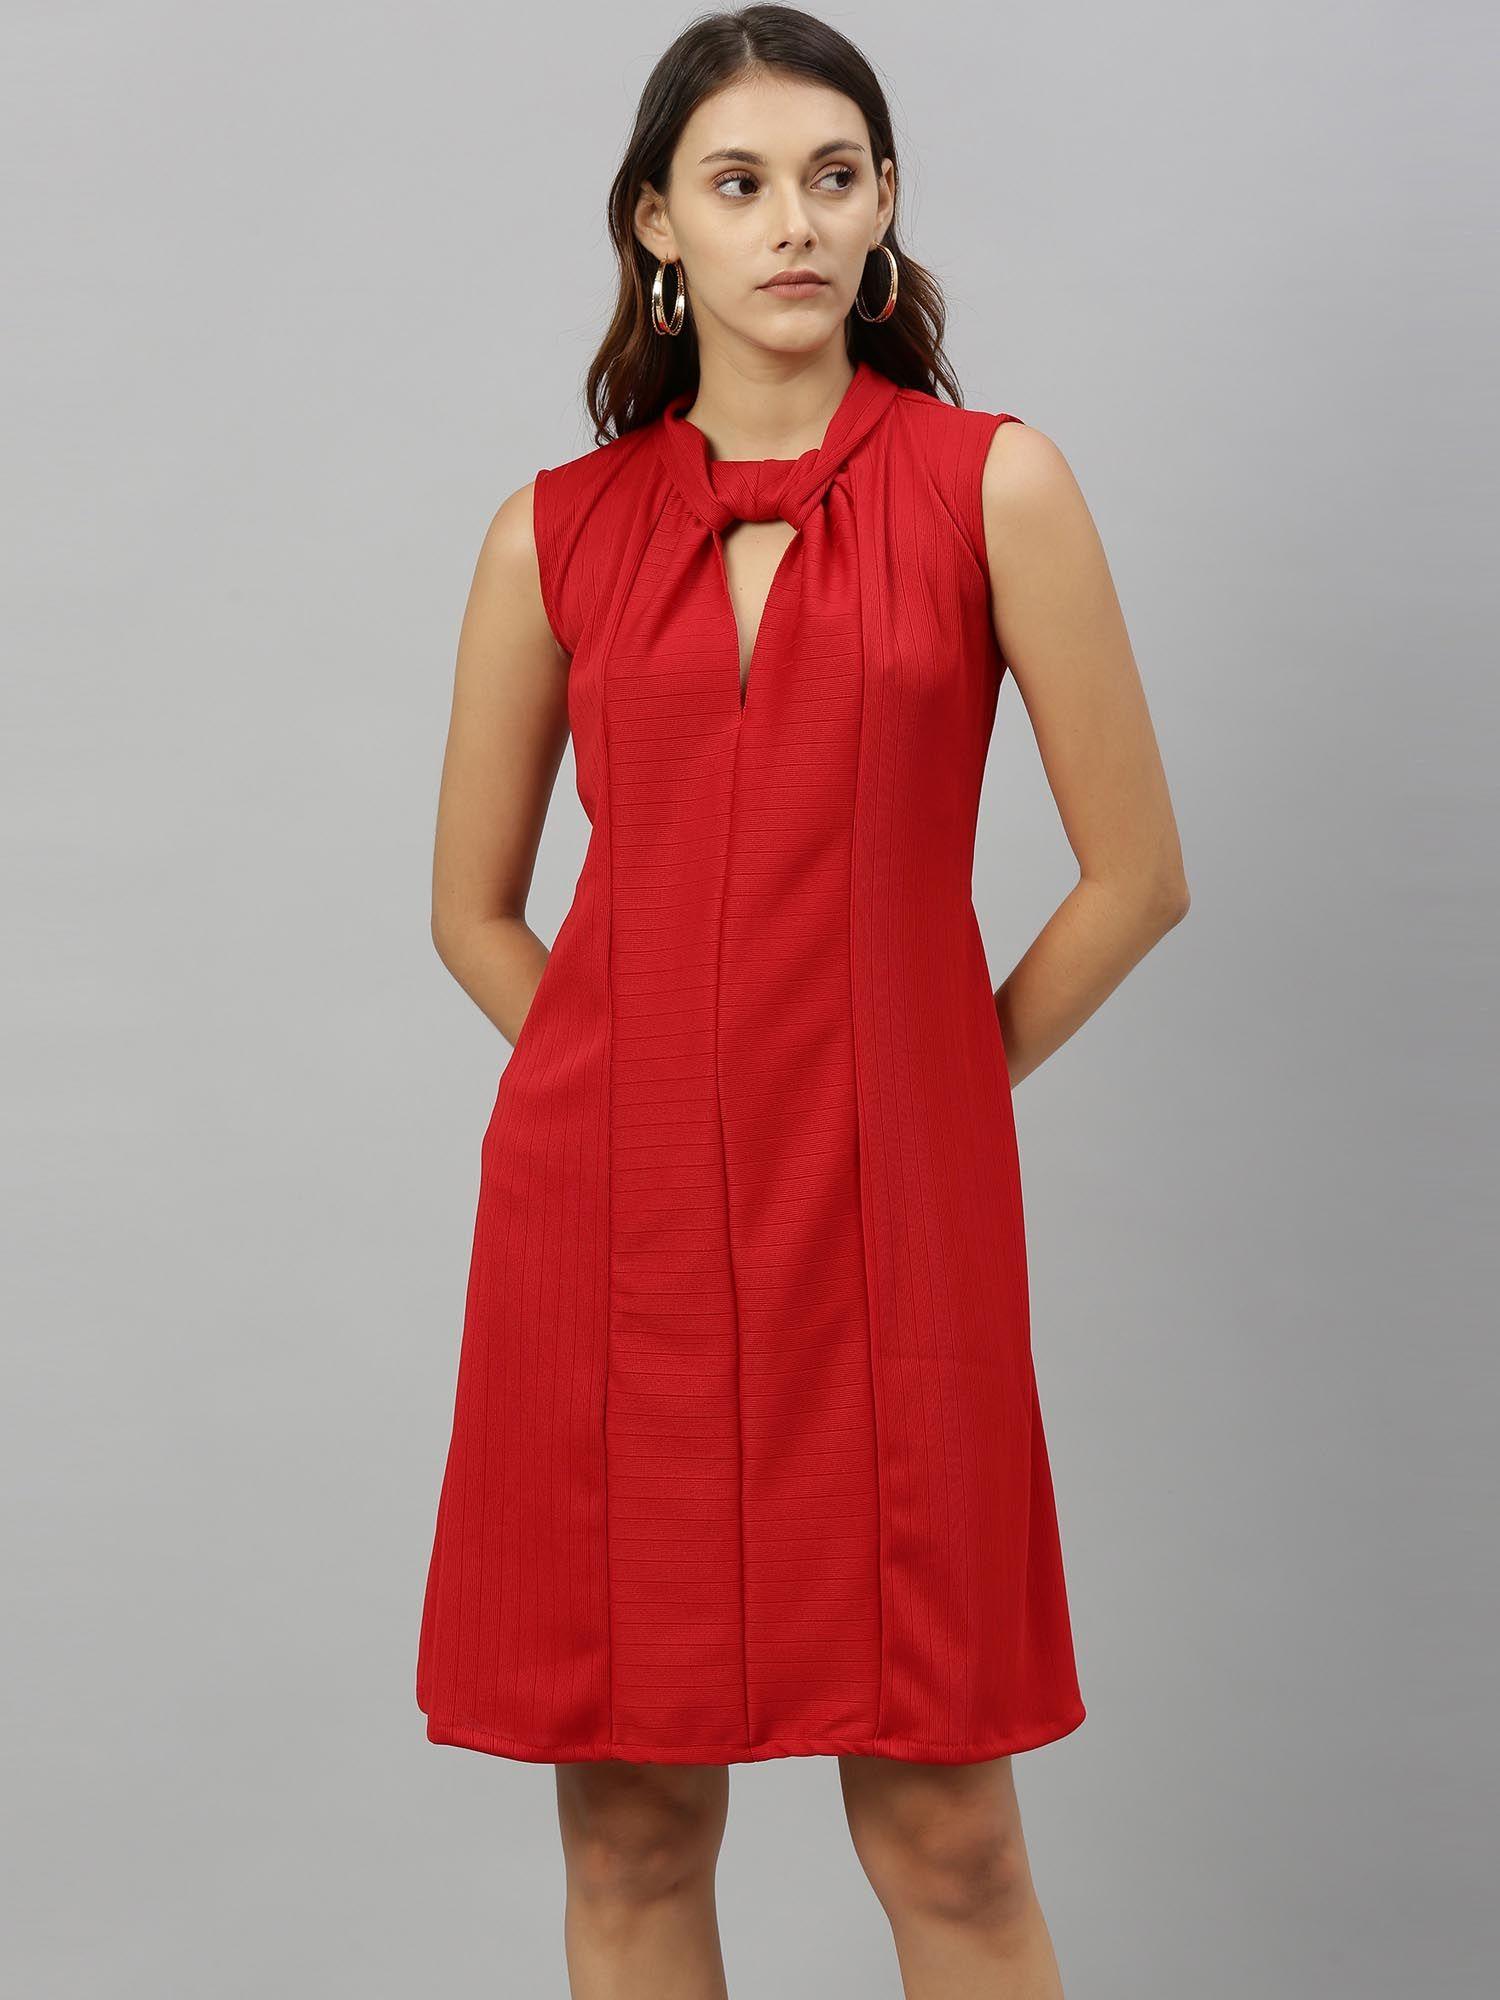 red stripes casual knee length dress